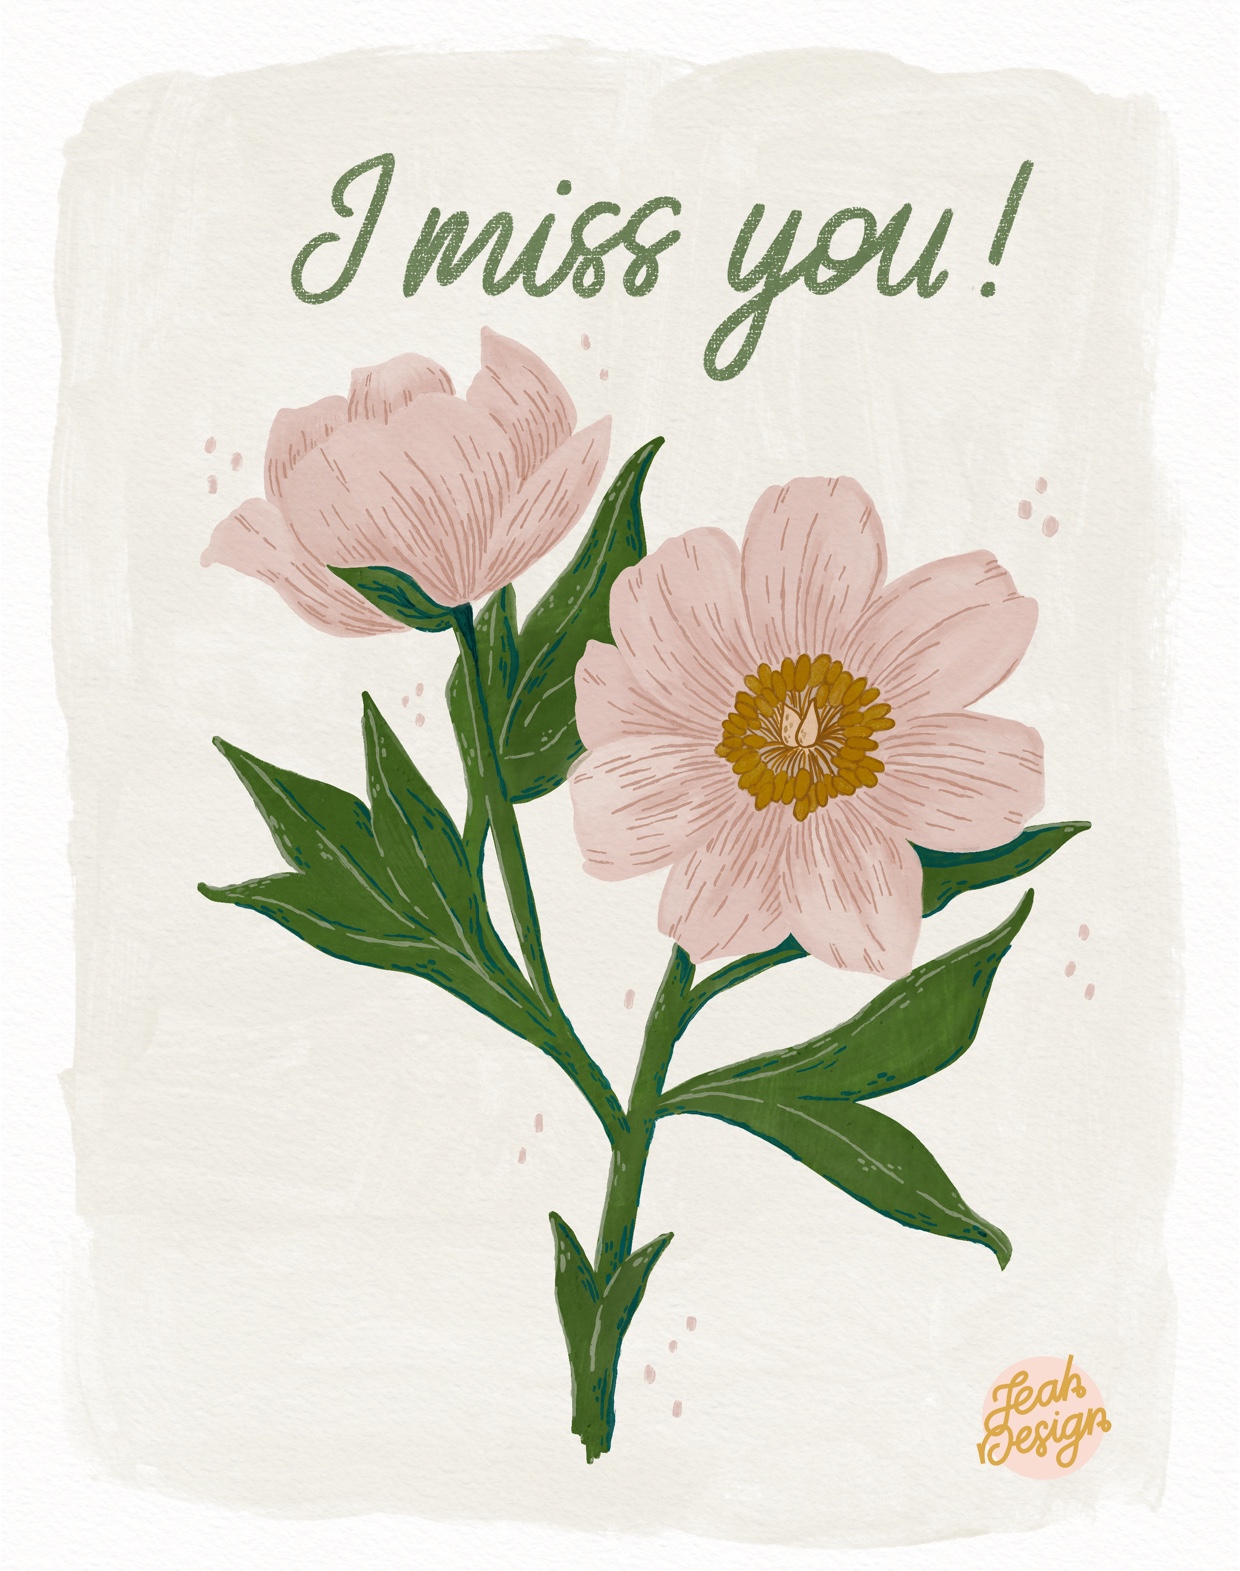 A digitally painted pastel greeting card with two flowers and the text 